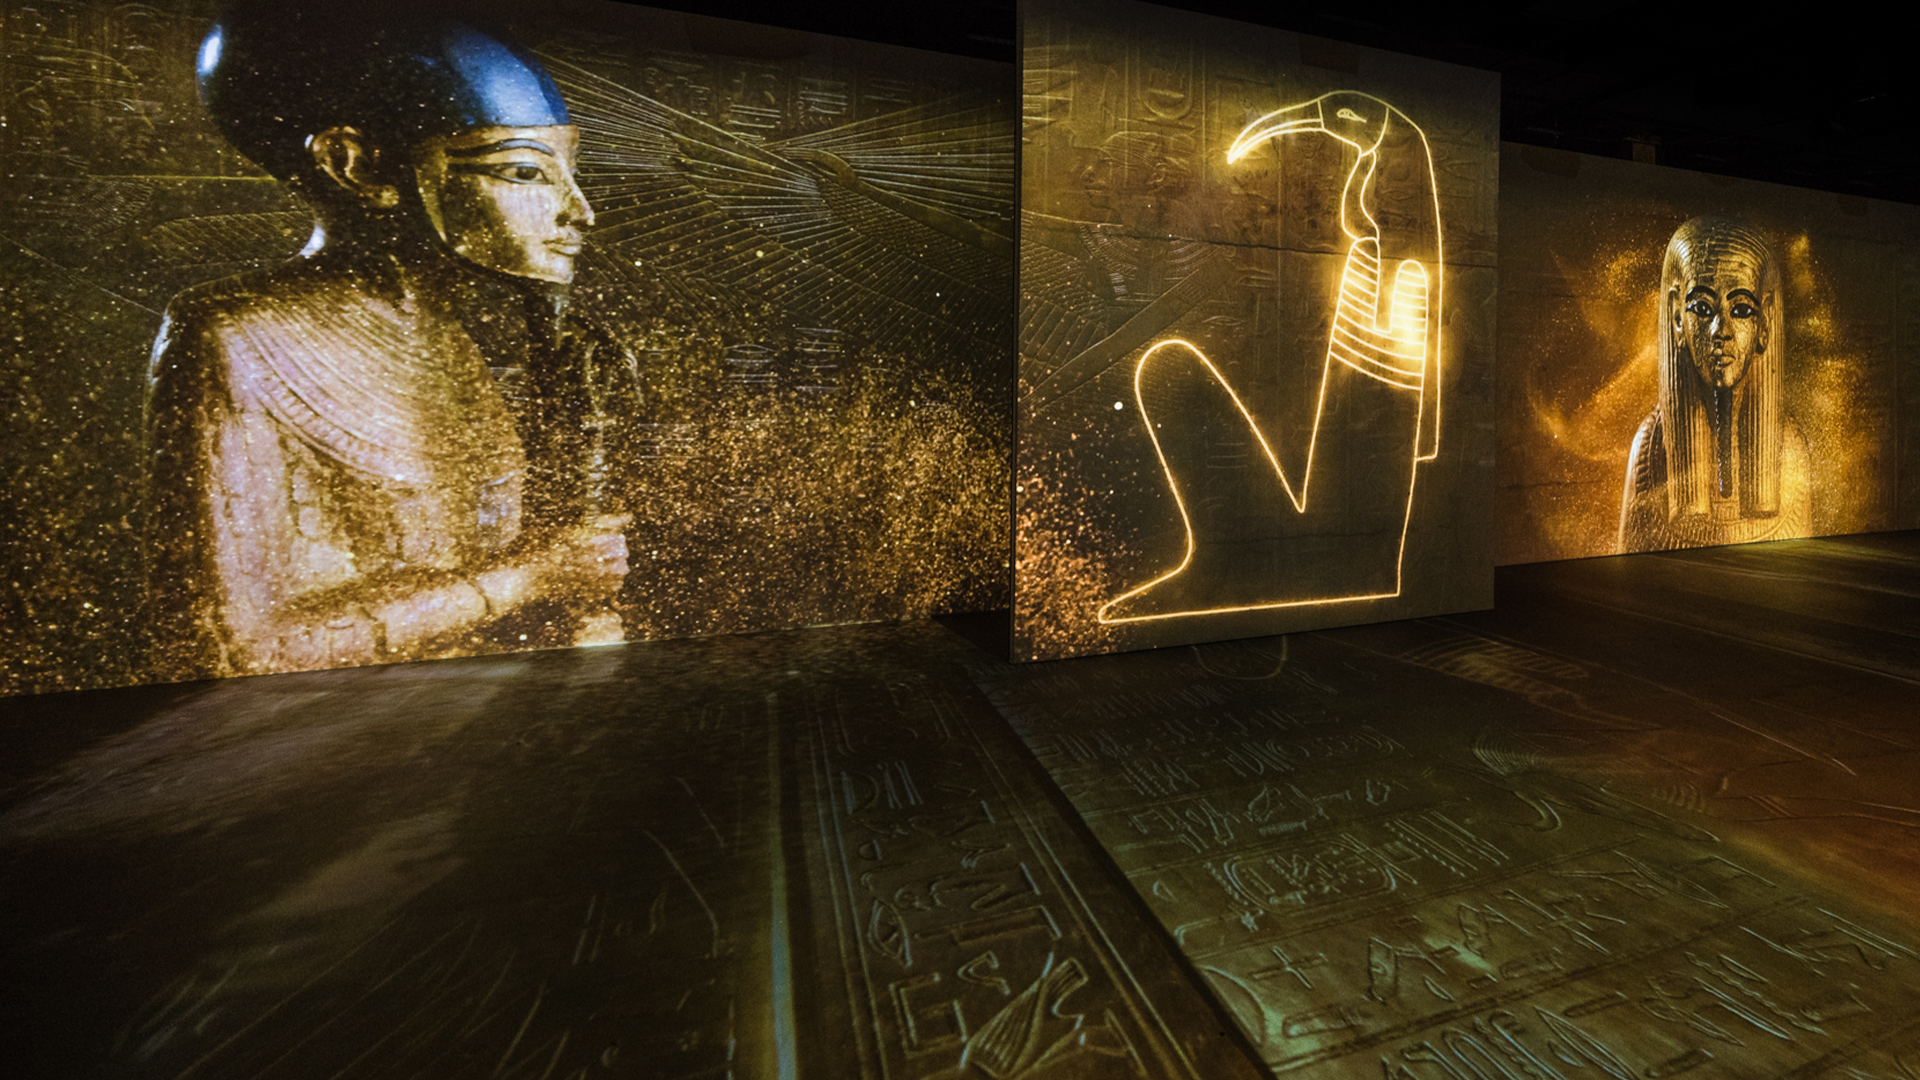 Images of King Tut's treasures: including the statuette of Ptah: Beyond Tut